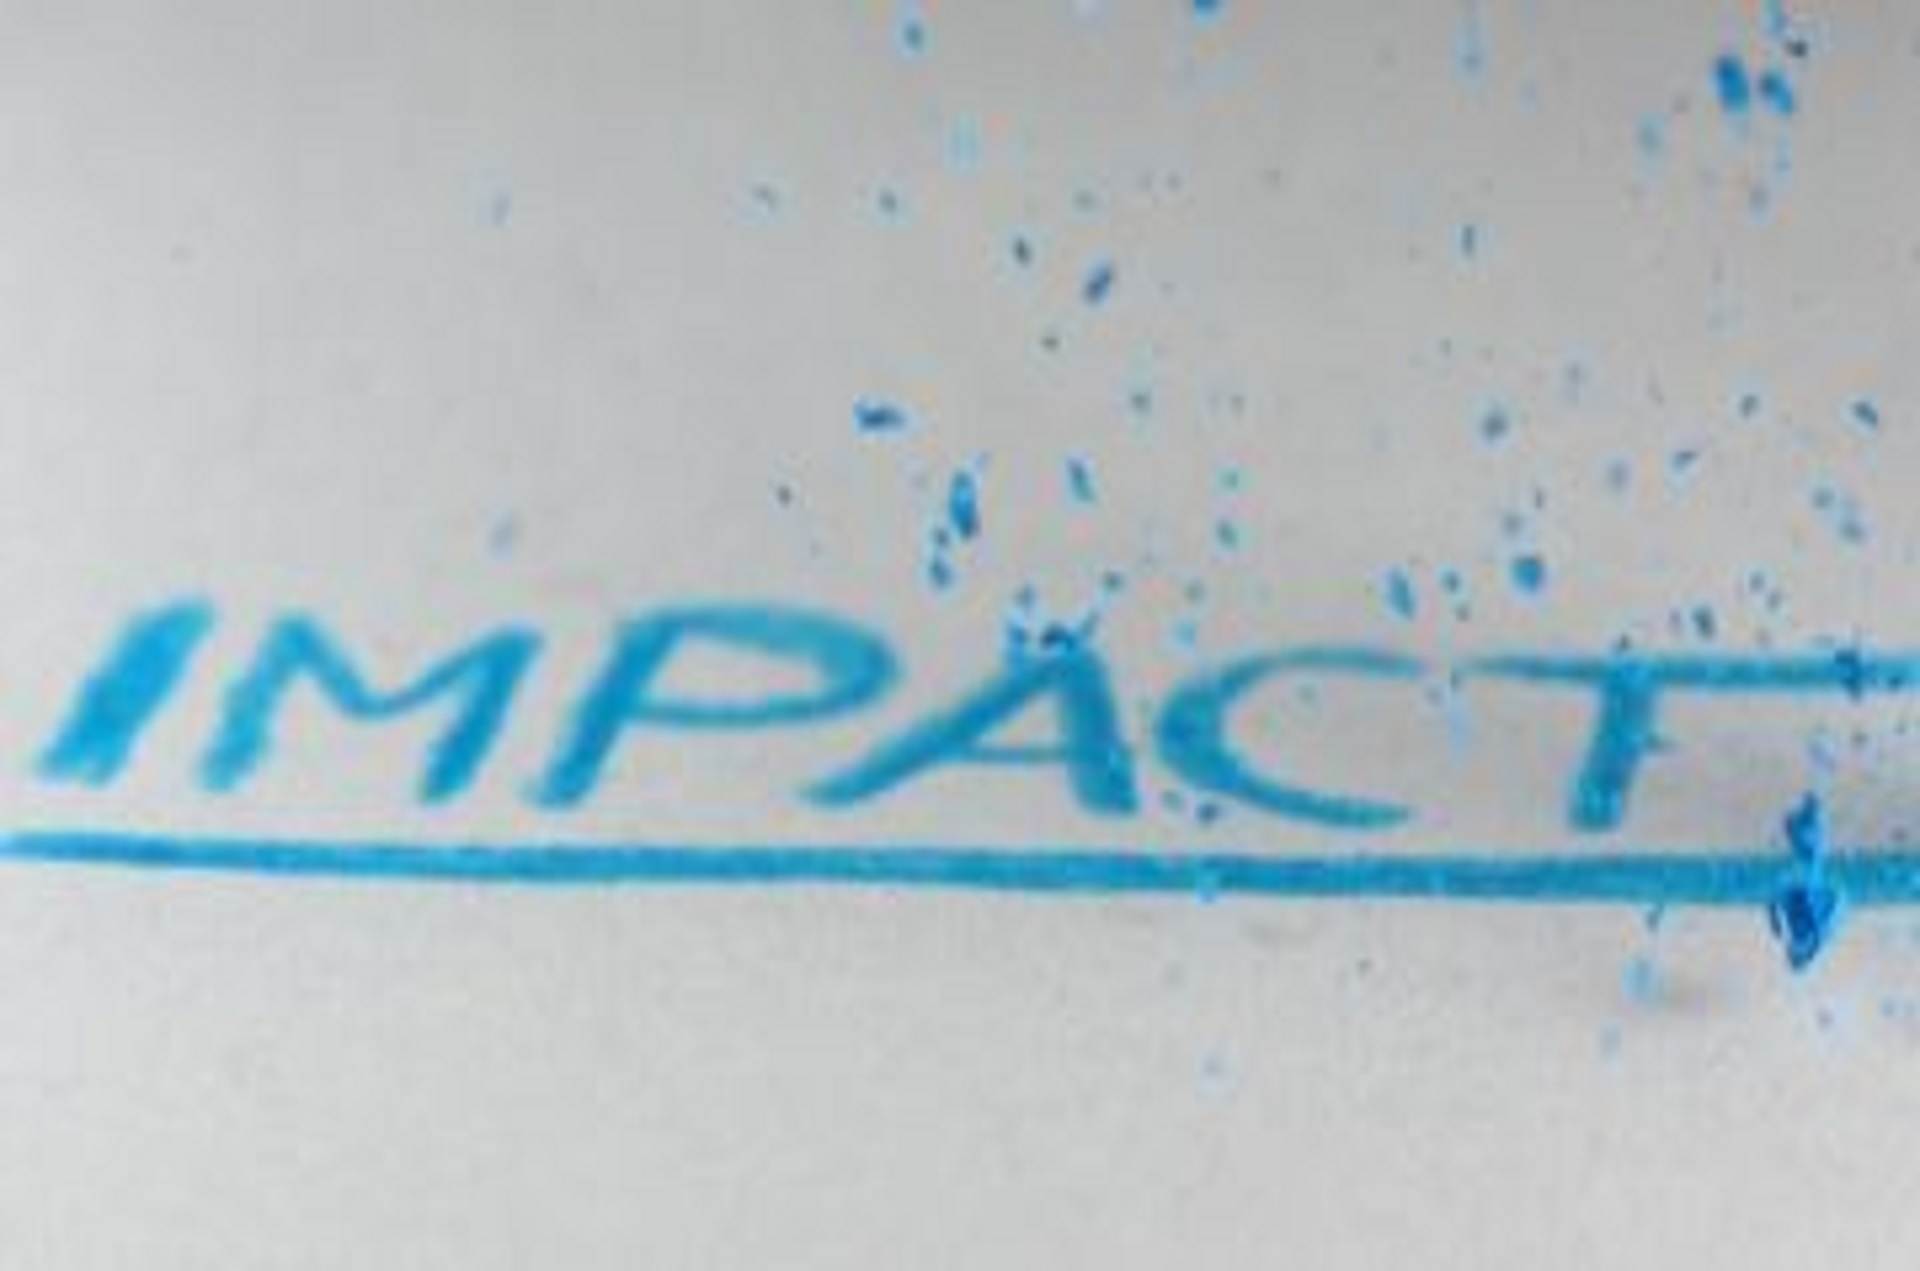 the word 'impact' written in blue pencil